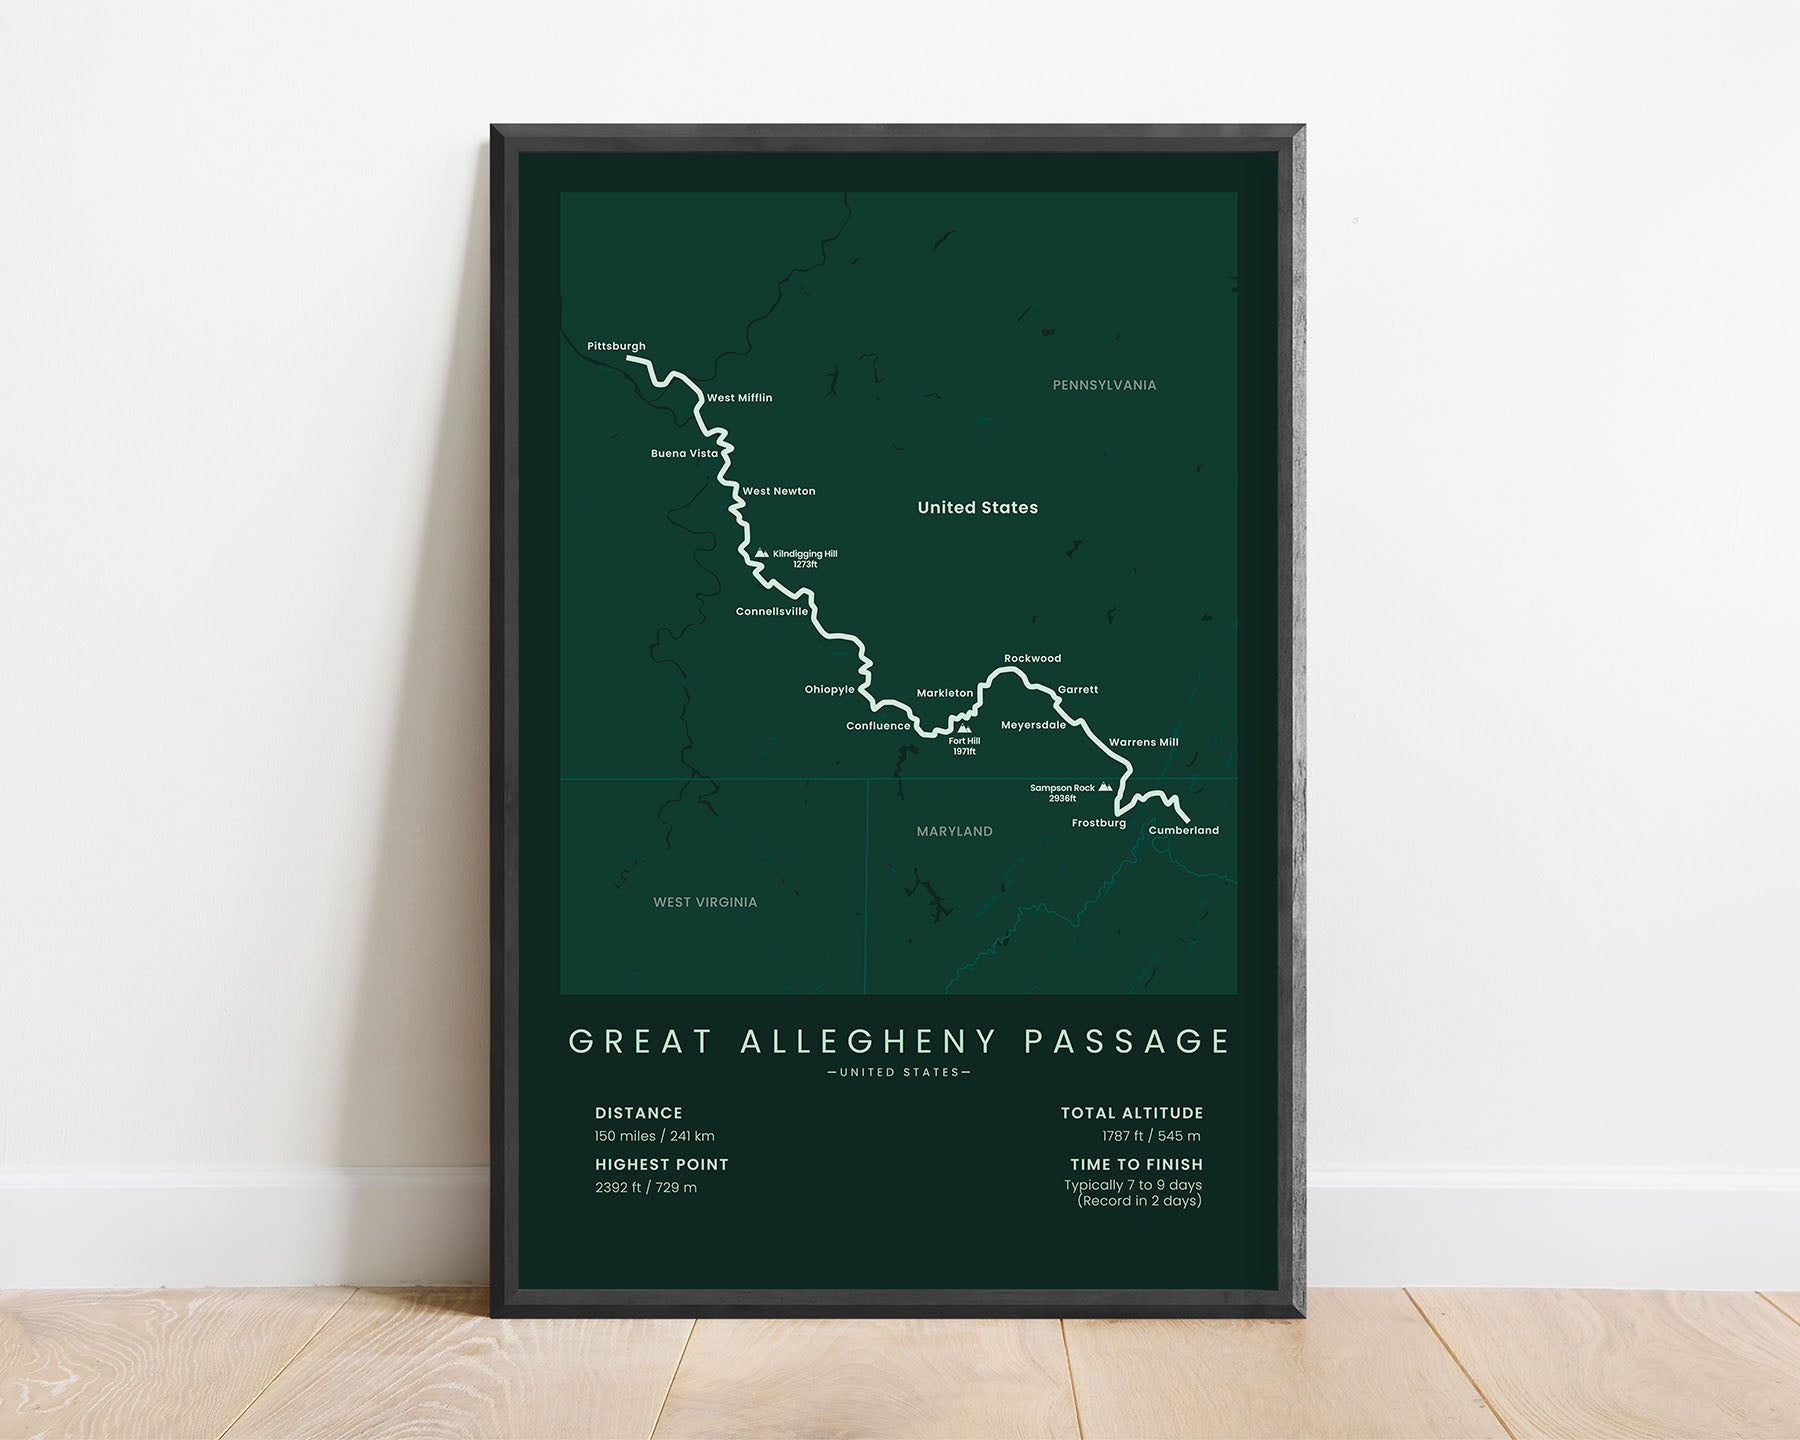 Great Allegheny Passage (United States) Path Poster with Green Background